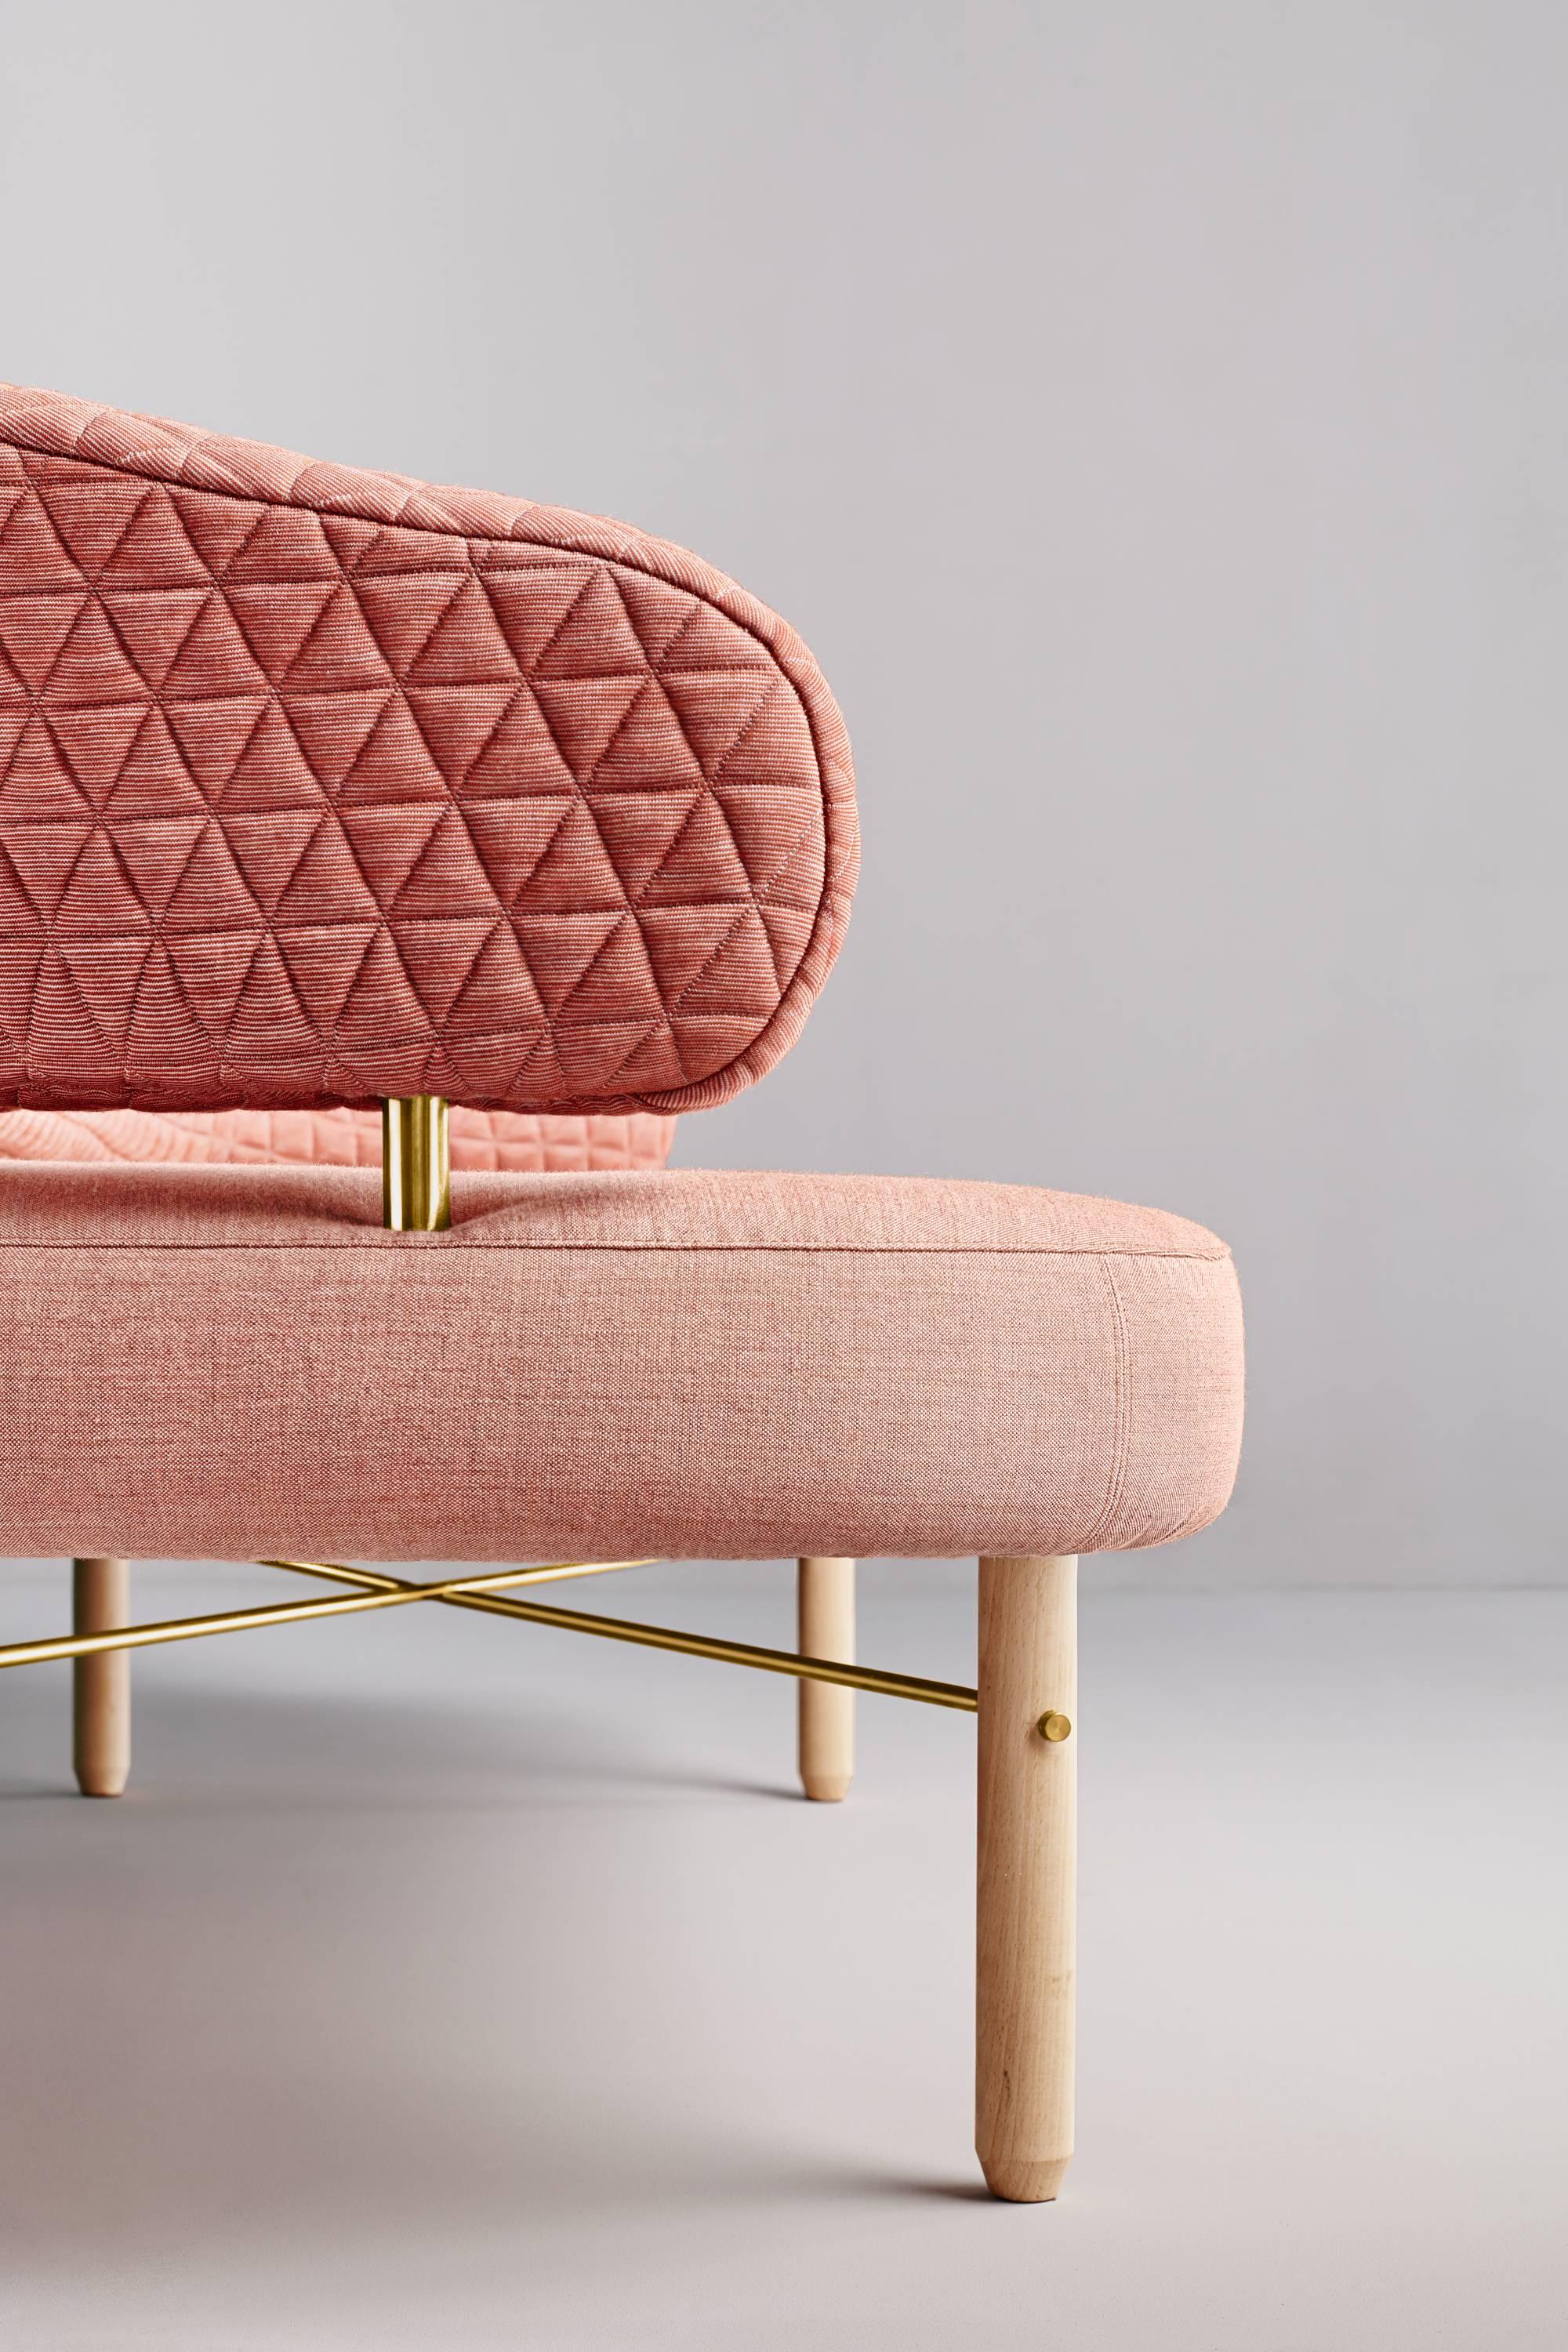 Simone sofa - Sputnik Studio - Design Homage to Nina Simone
Elegant and flirty, Simone catches the attention of every person in the room, with its back suspended over the seat letting us see the beautiful gap between both parts and the golden metal